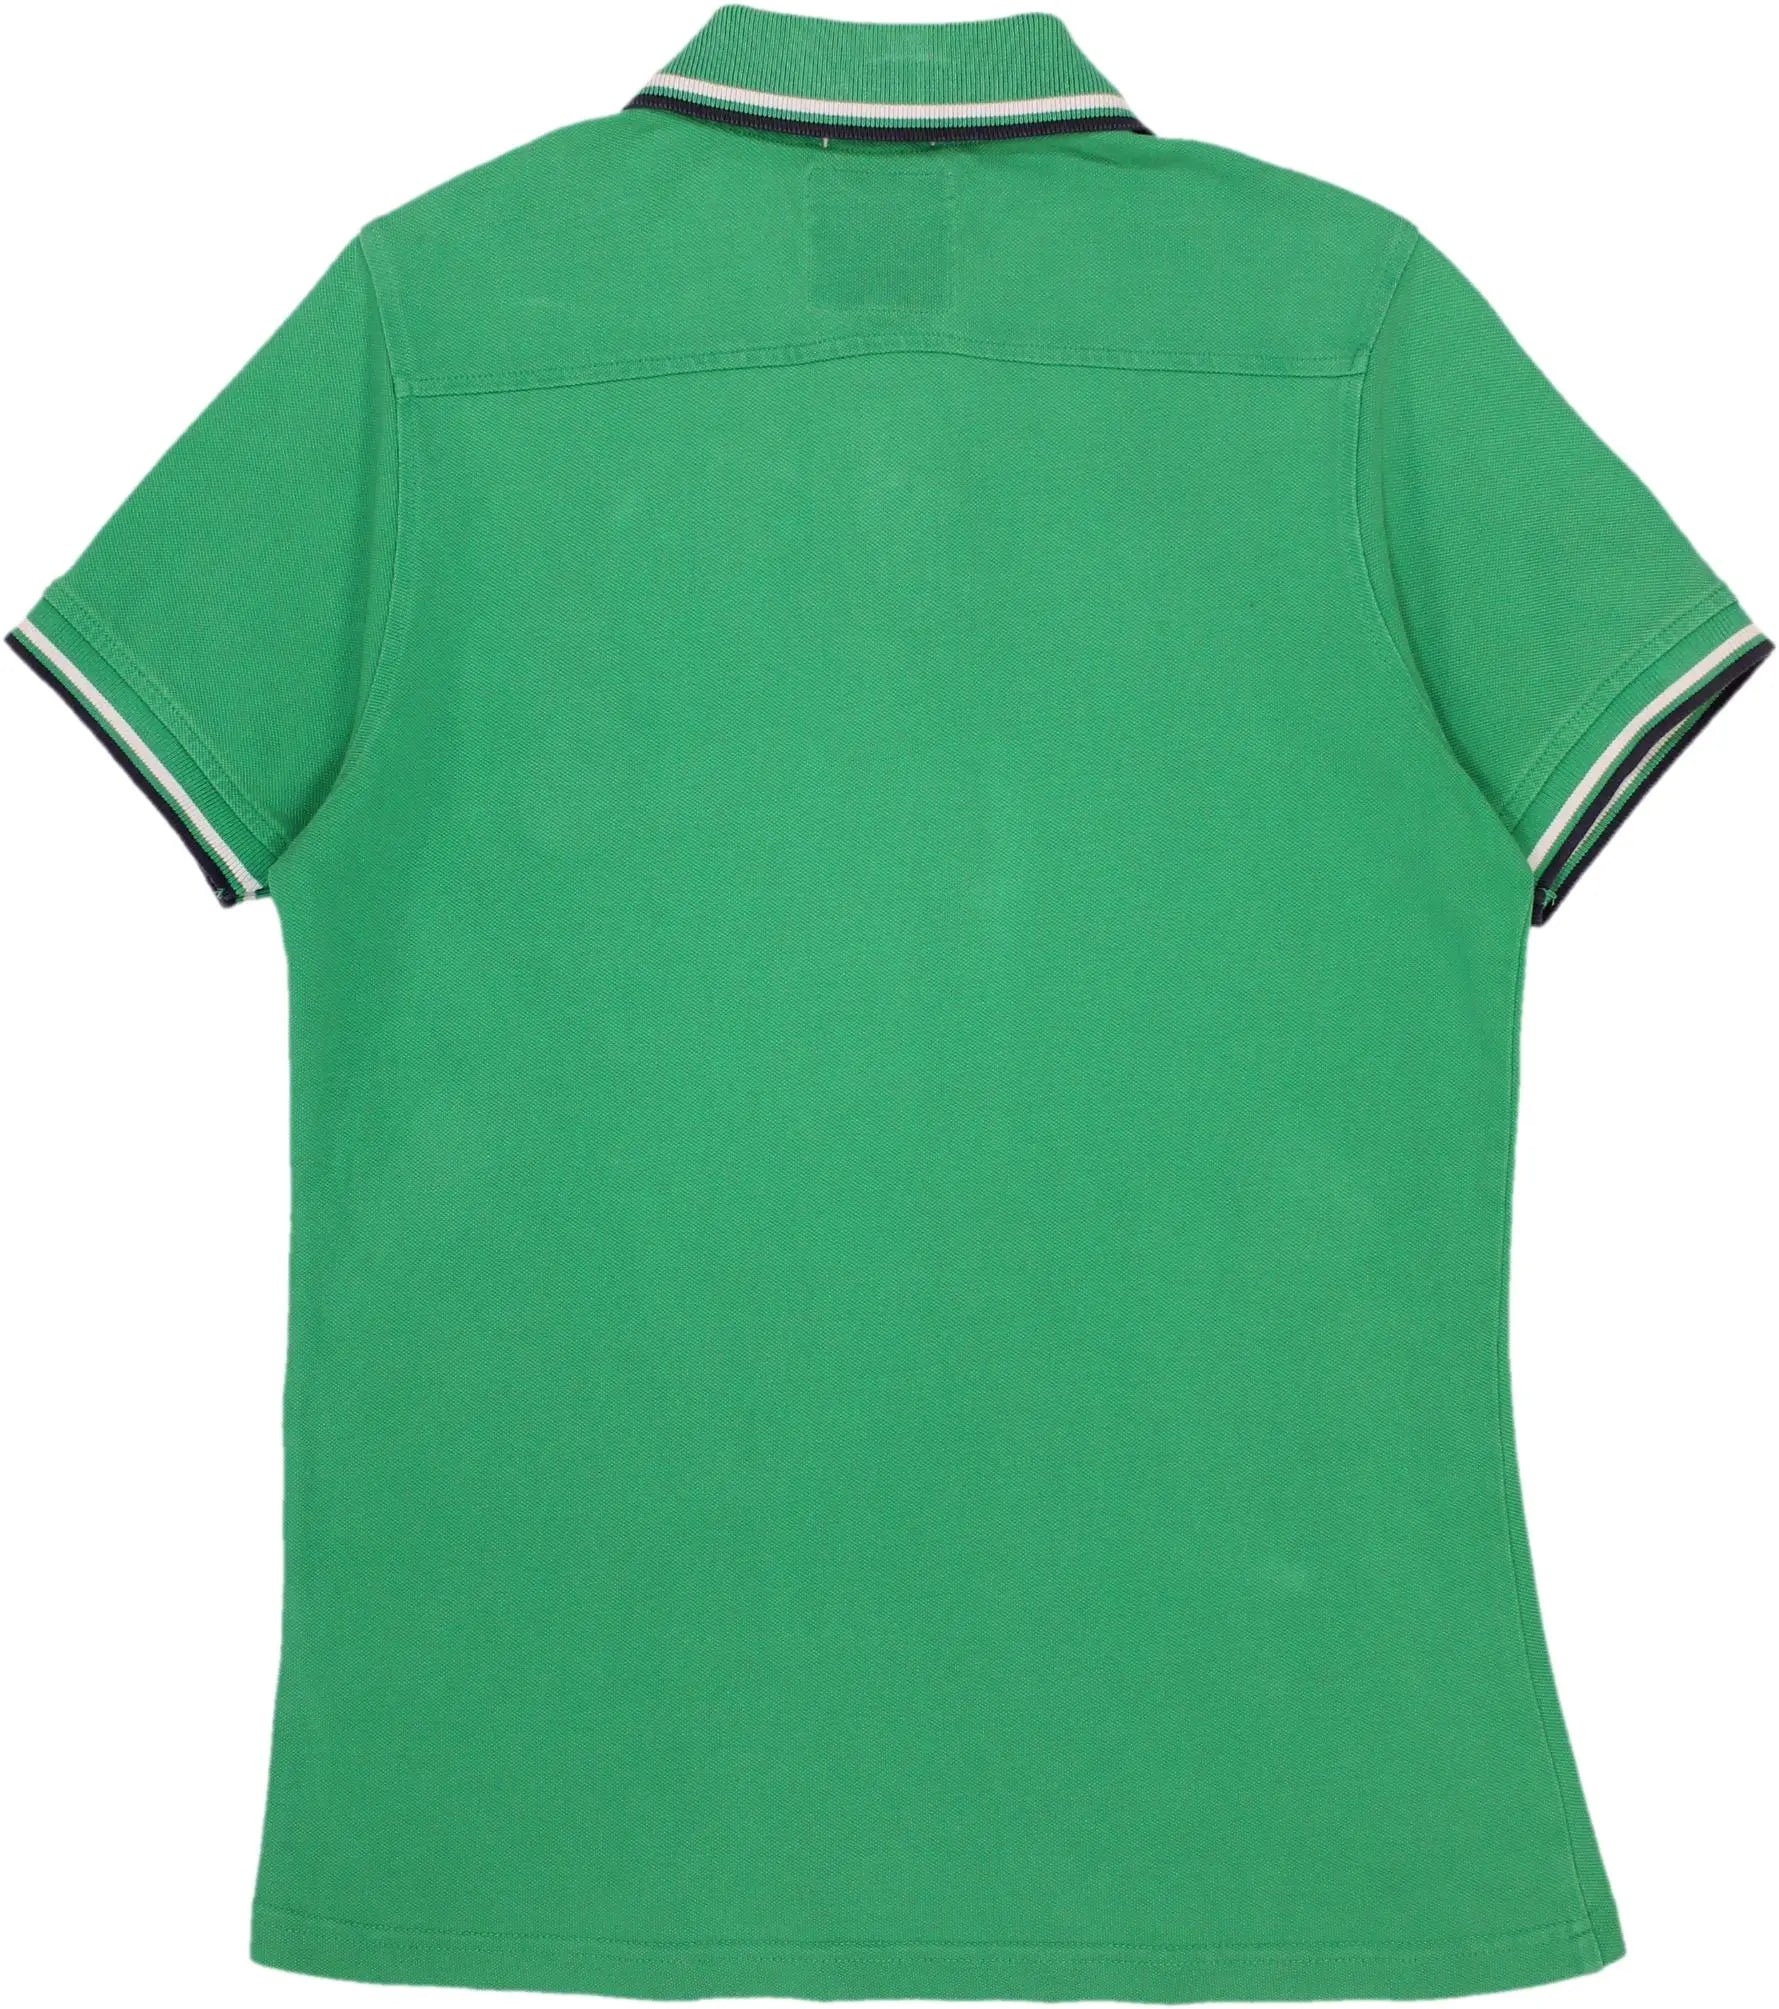 Chief - Green Polo Shirt- ThriftTale.com - Vintage and second handclothing